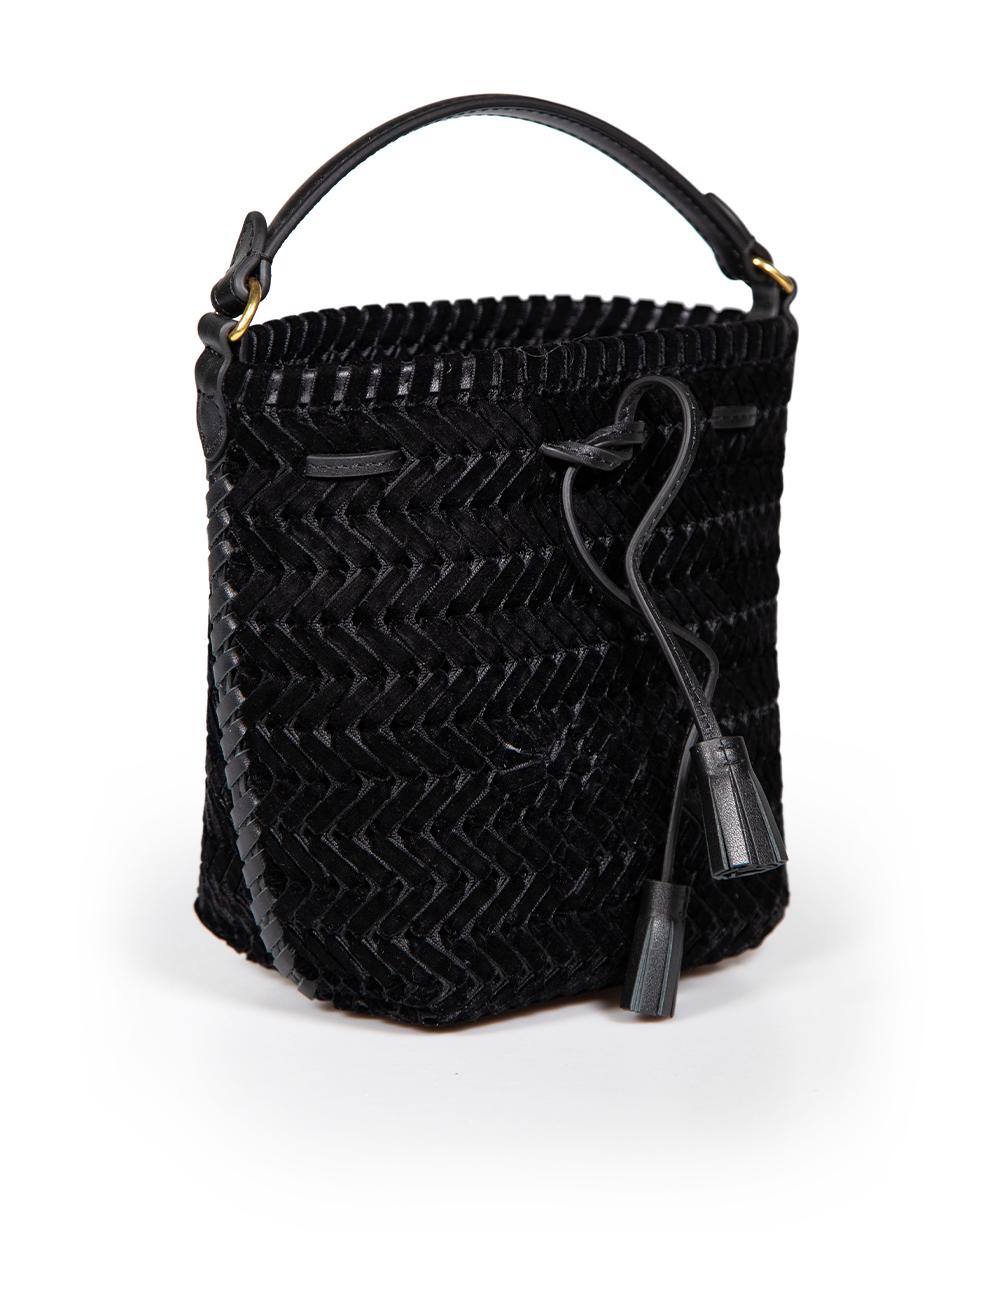 CONDITION is Very good. Hardly any visible wear to bag is evident on this used Anya Hindmarch designer resale item.
 
 
 
 Details
 
 
 Black
 
 Velvet
 
 Mini bucket bag
 
 Woven detail
 
 Gold tone hardware
 
 1x Leather top handle
 
 1x Rainbow